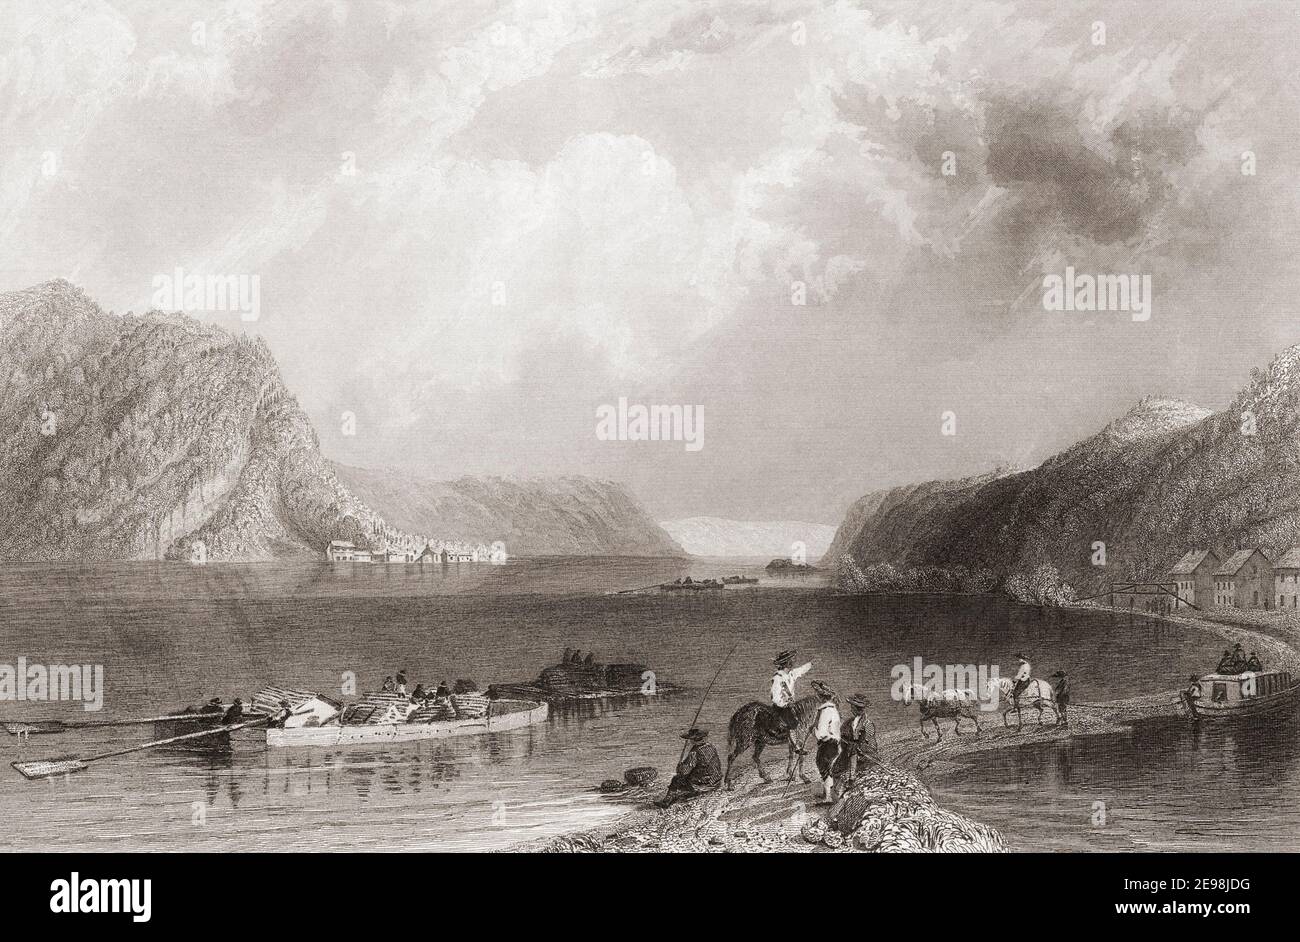 19th century view of the Susquehanna River at Liverpool, Pennsylvania, United States of America.  From a 19th century engraving by Henry Griffiths after a work by W.H. Bartlett. Stock Photo